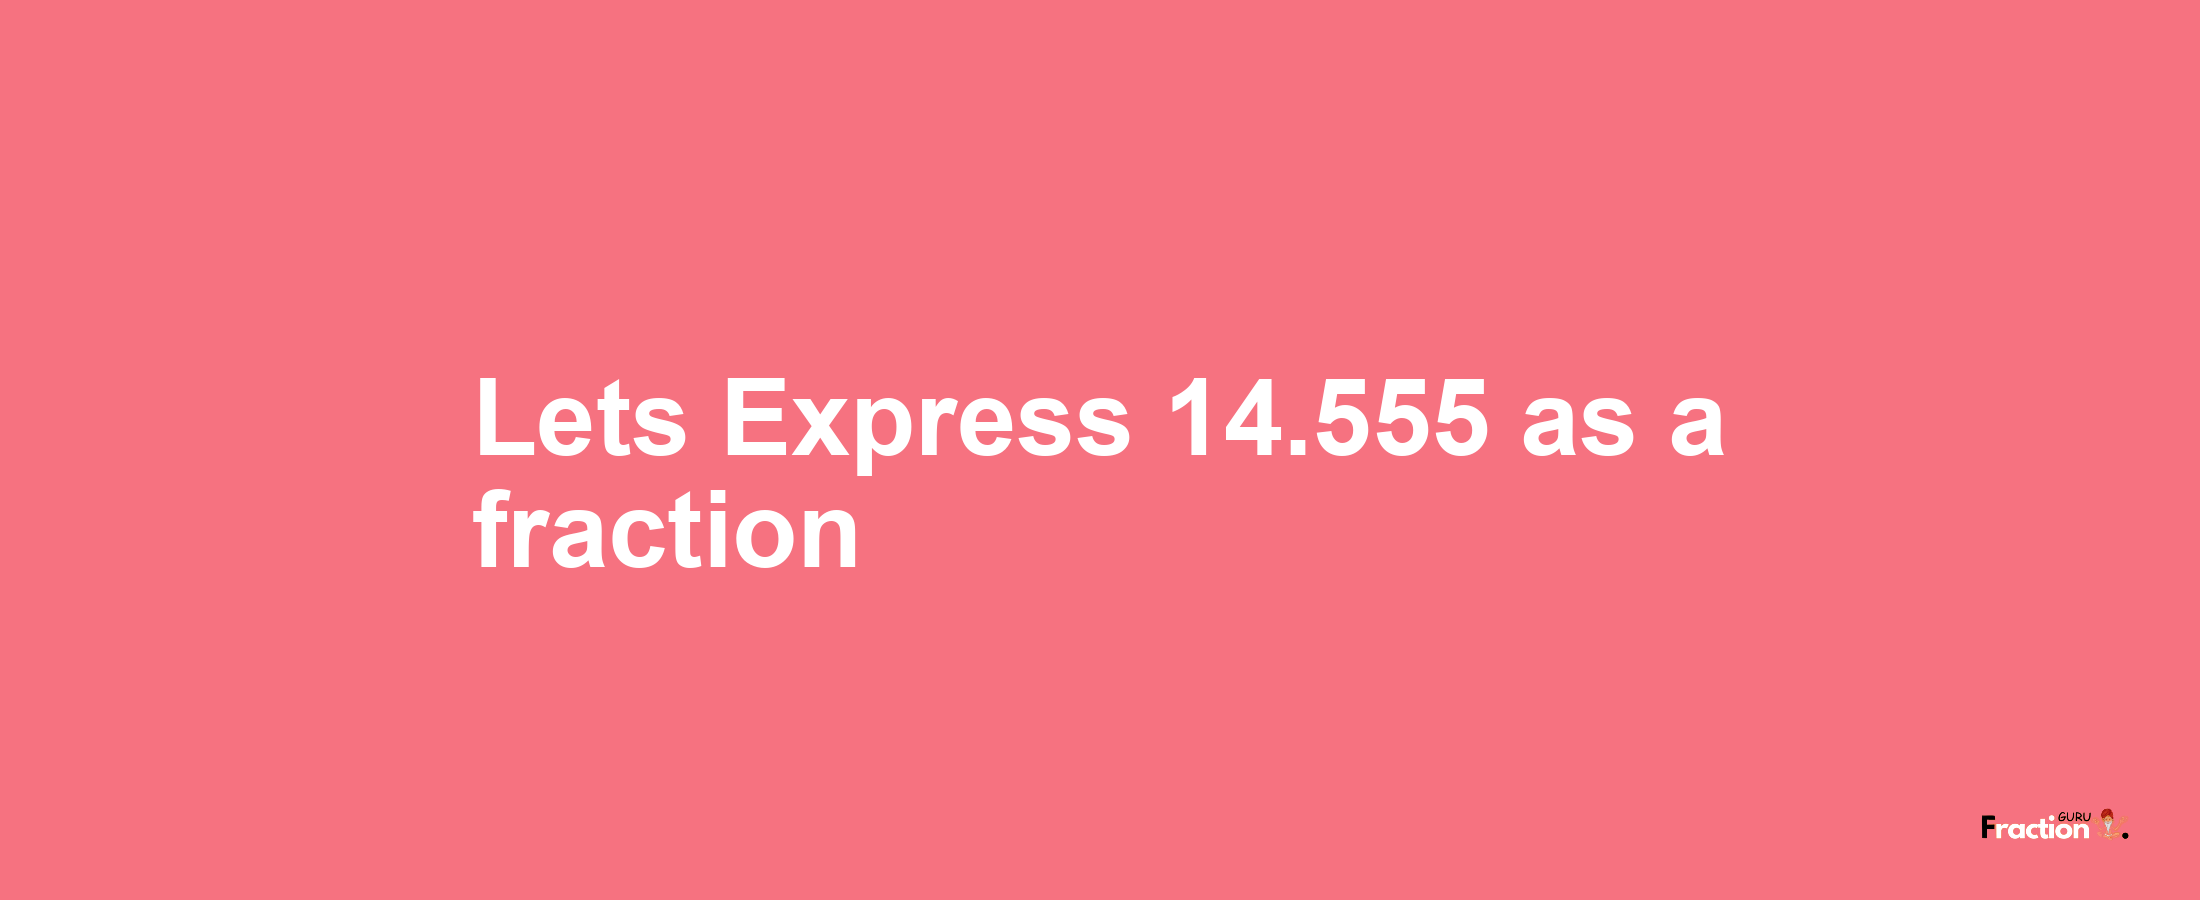 Lets Express 14.555 as afraction